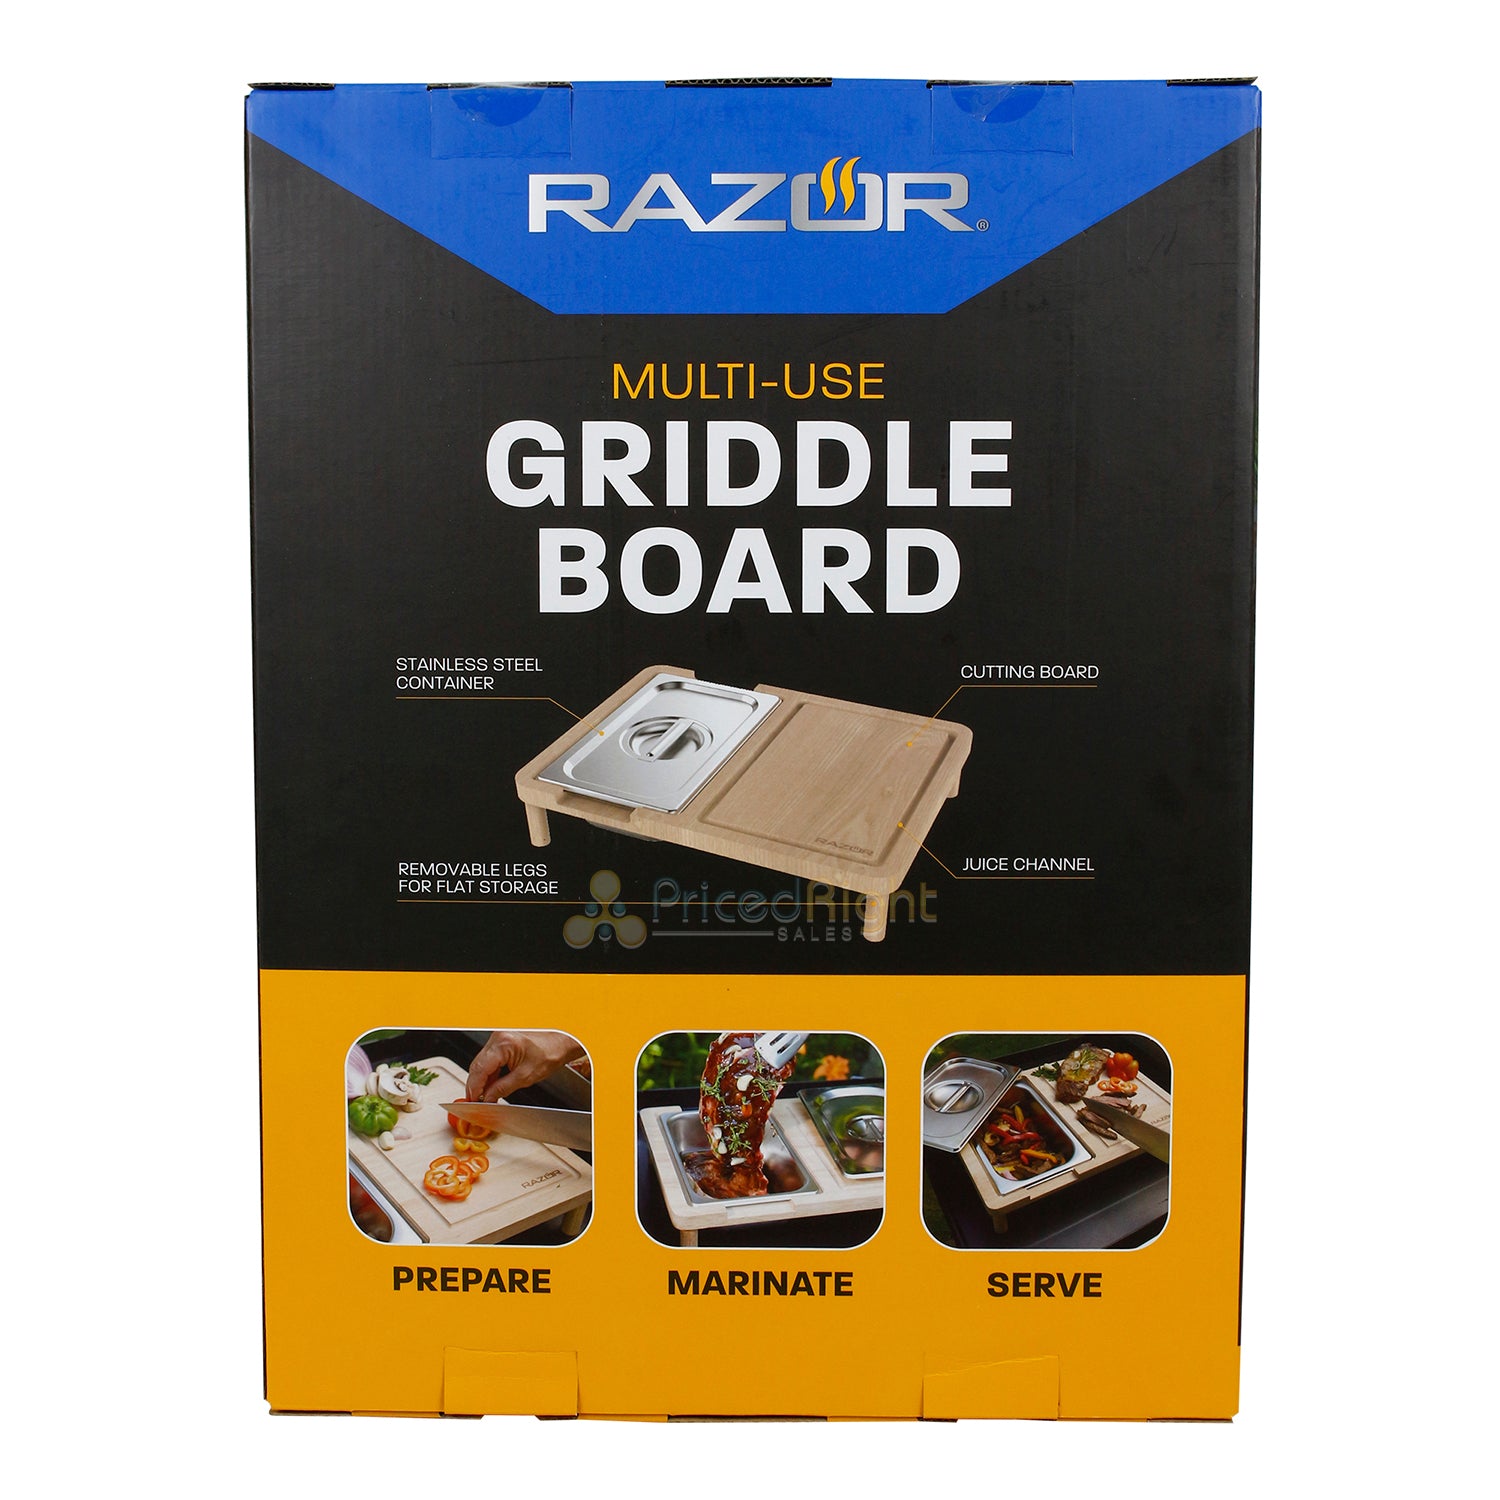 Razor Multi Use Griddle Board For Food Prep W/ Stainless Steel Container & Legs